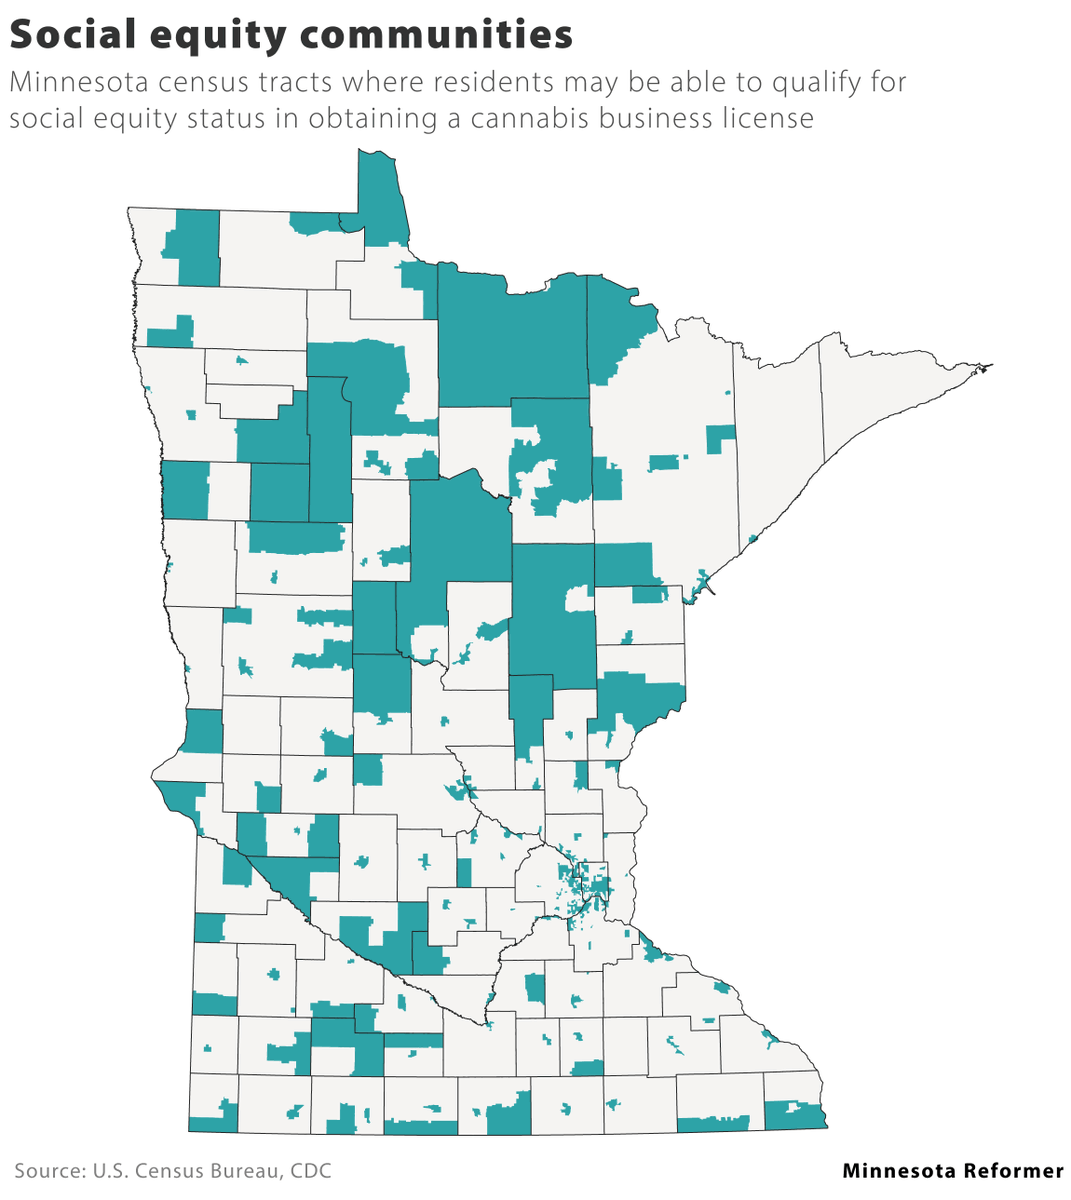 If you live in one of the green areas on the map you may be eligible to apply for a social equity cannabis license, granting you a leg up on your local competition. minnesotareformer.com/2024/05/28/mor…